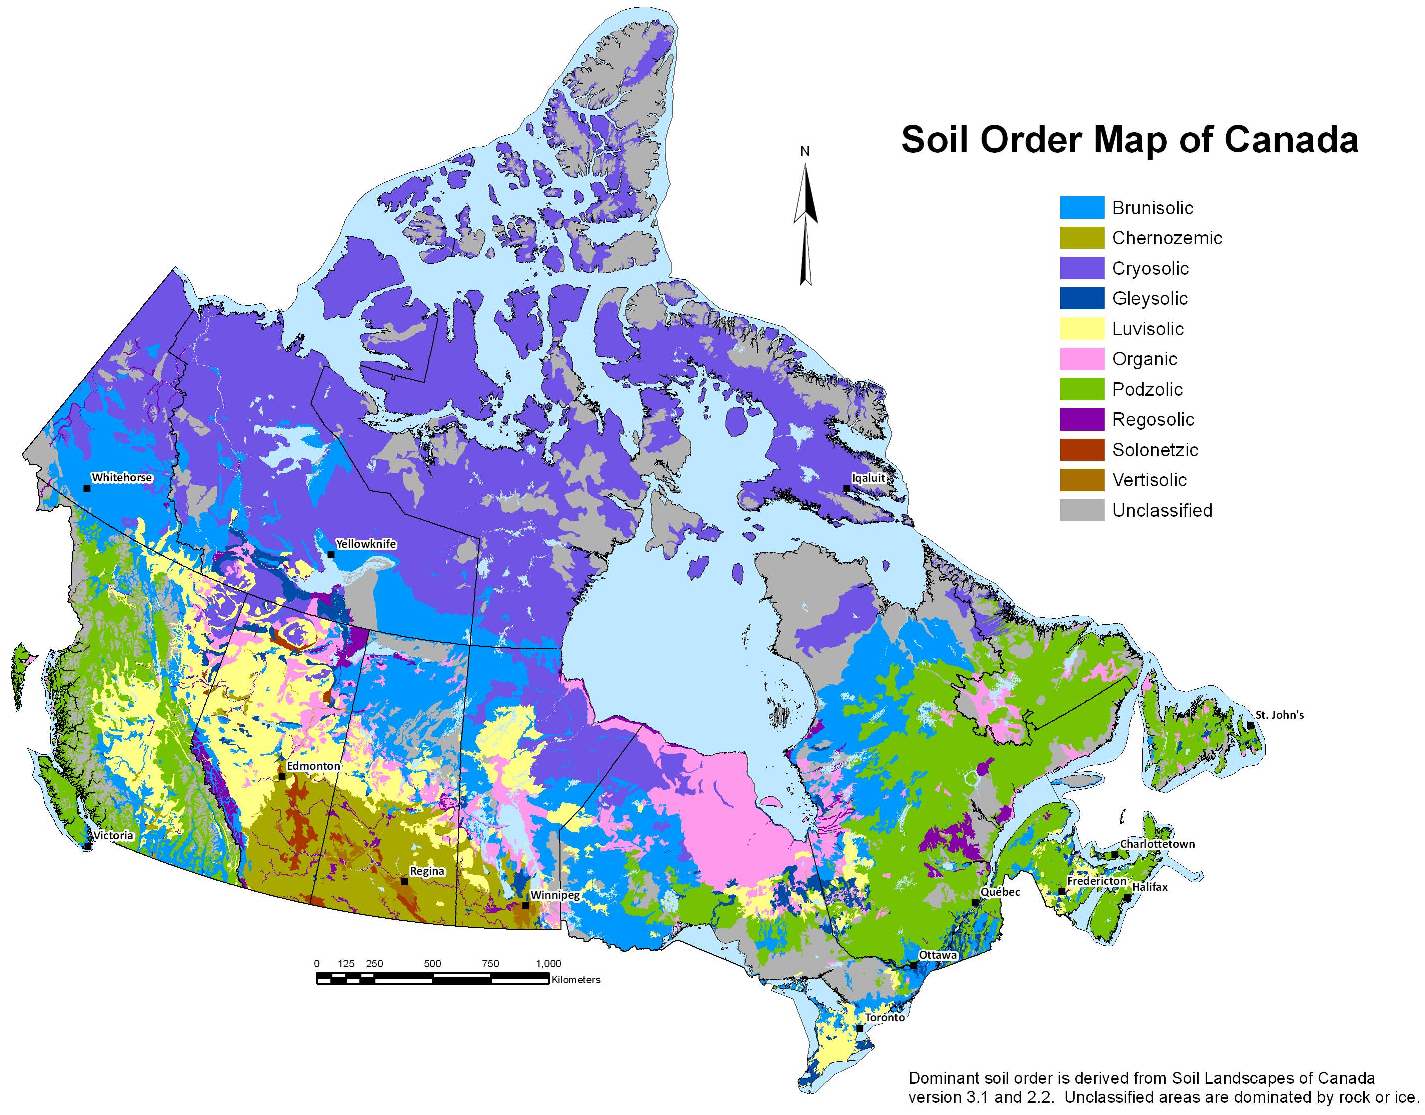 Soil order map of Canada. In Canada’s predominantly cool and humid climate (which applies to most places other than the far north), podsolization is the norm. This involves downward transportation of hydrogen, iron, and aluminum (and other elements) from the upper part of the soil profile, and accumulation of clay, iron, and aluminum in the B horizon. Most of the podsols, luvisols, and brunisols of Canada form through various types of podsolization.